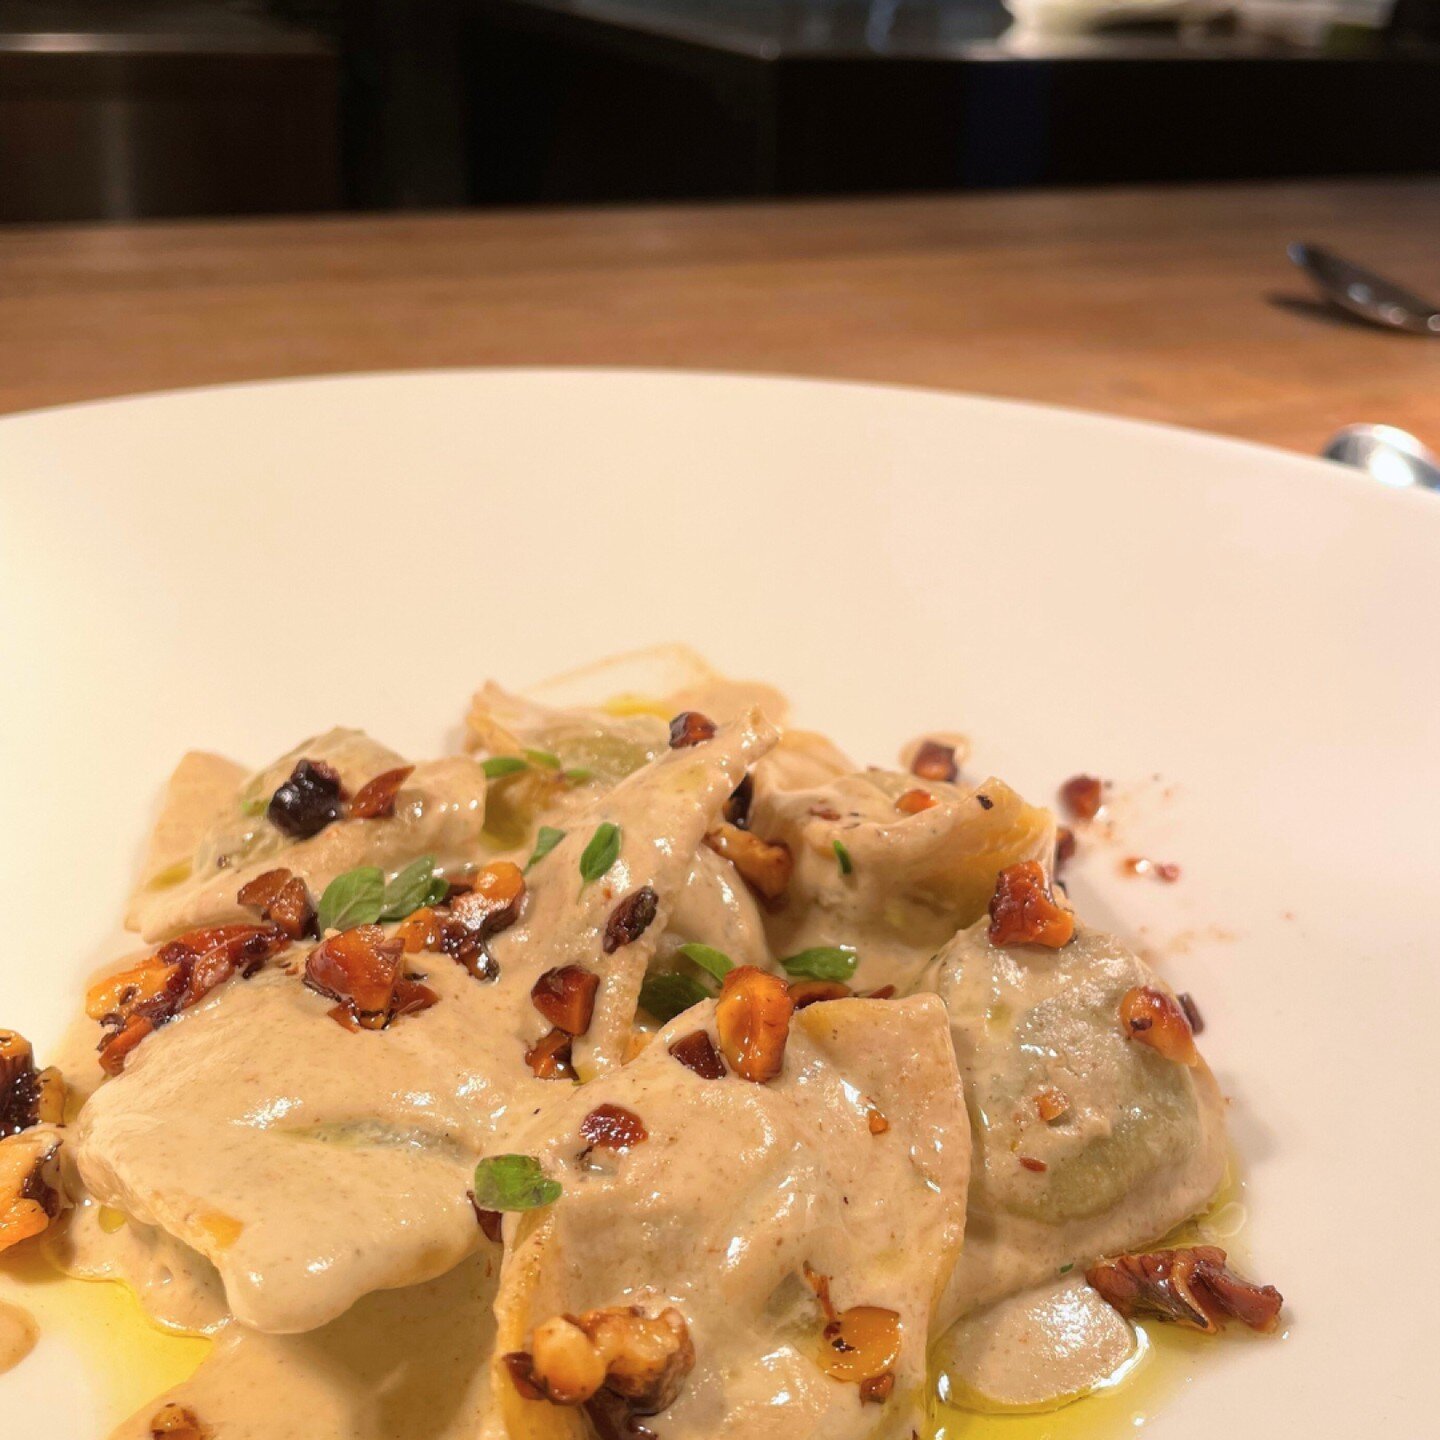 We love to make our veggies decadent...
.
The Ligurian Ravioli, the newest addition to the menu and our vegetarian option! 
.
Braised greens and parmigiana Reggiano stuffed raviolis with a creamy walnut pesto finished with fresh marjoram. 
.
Our chan